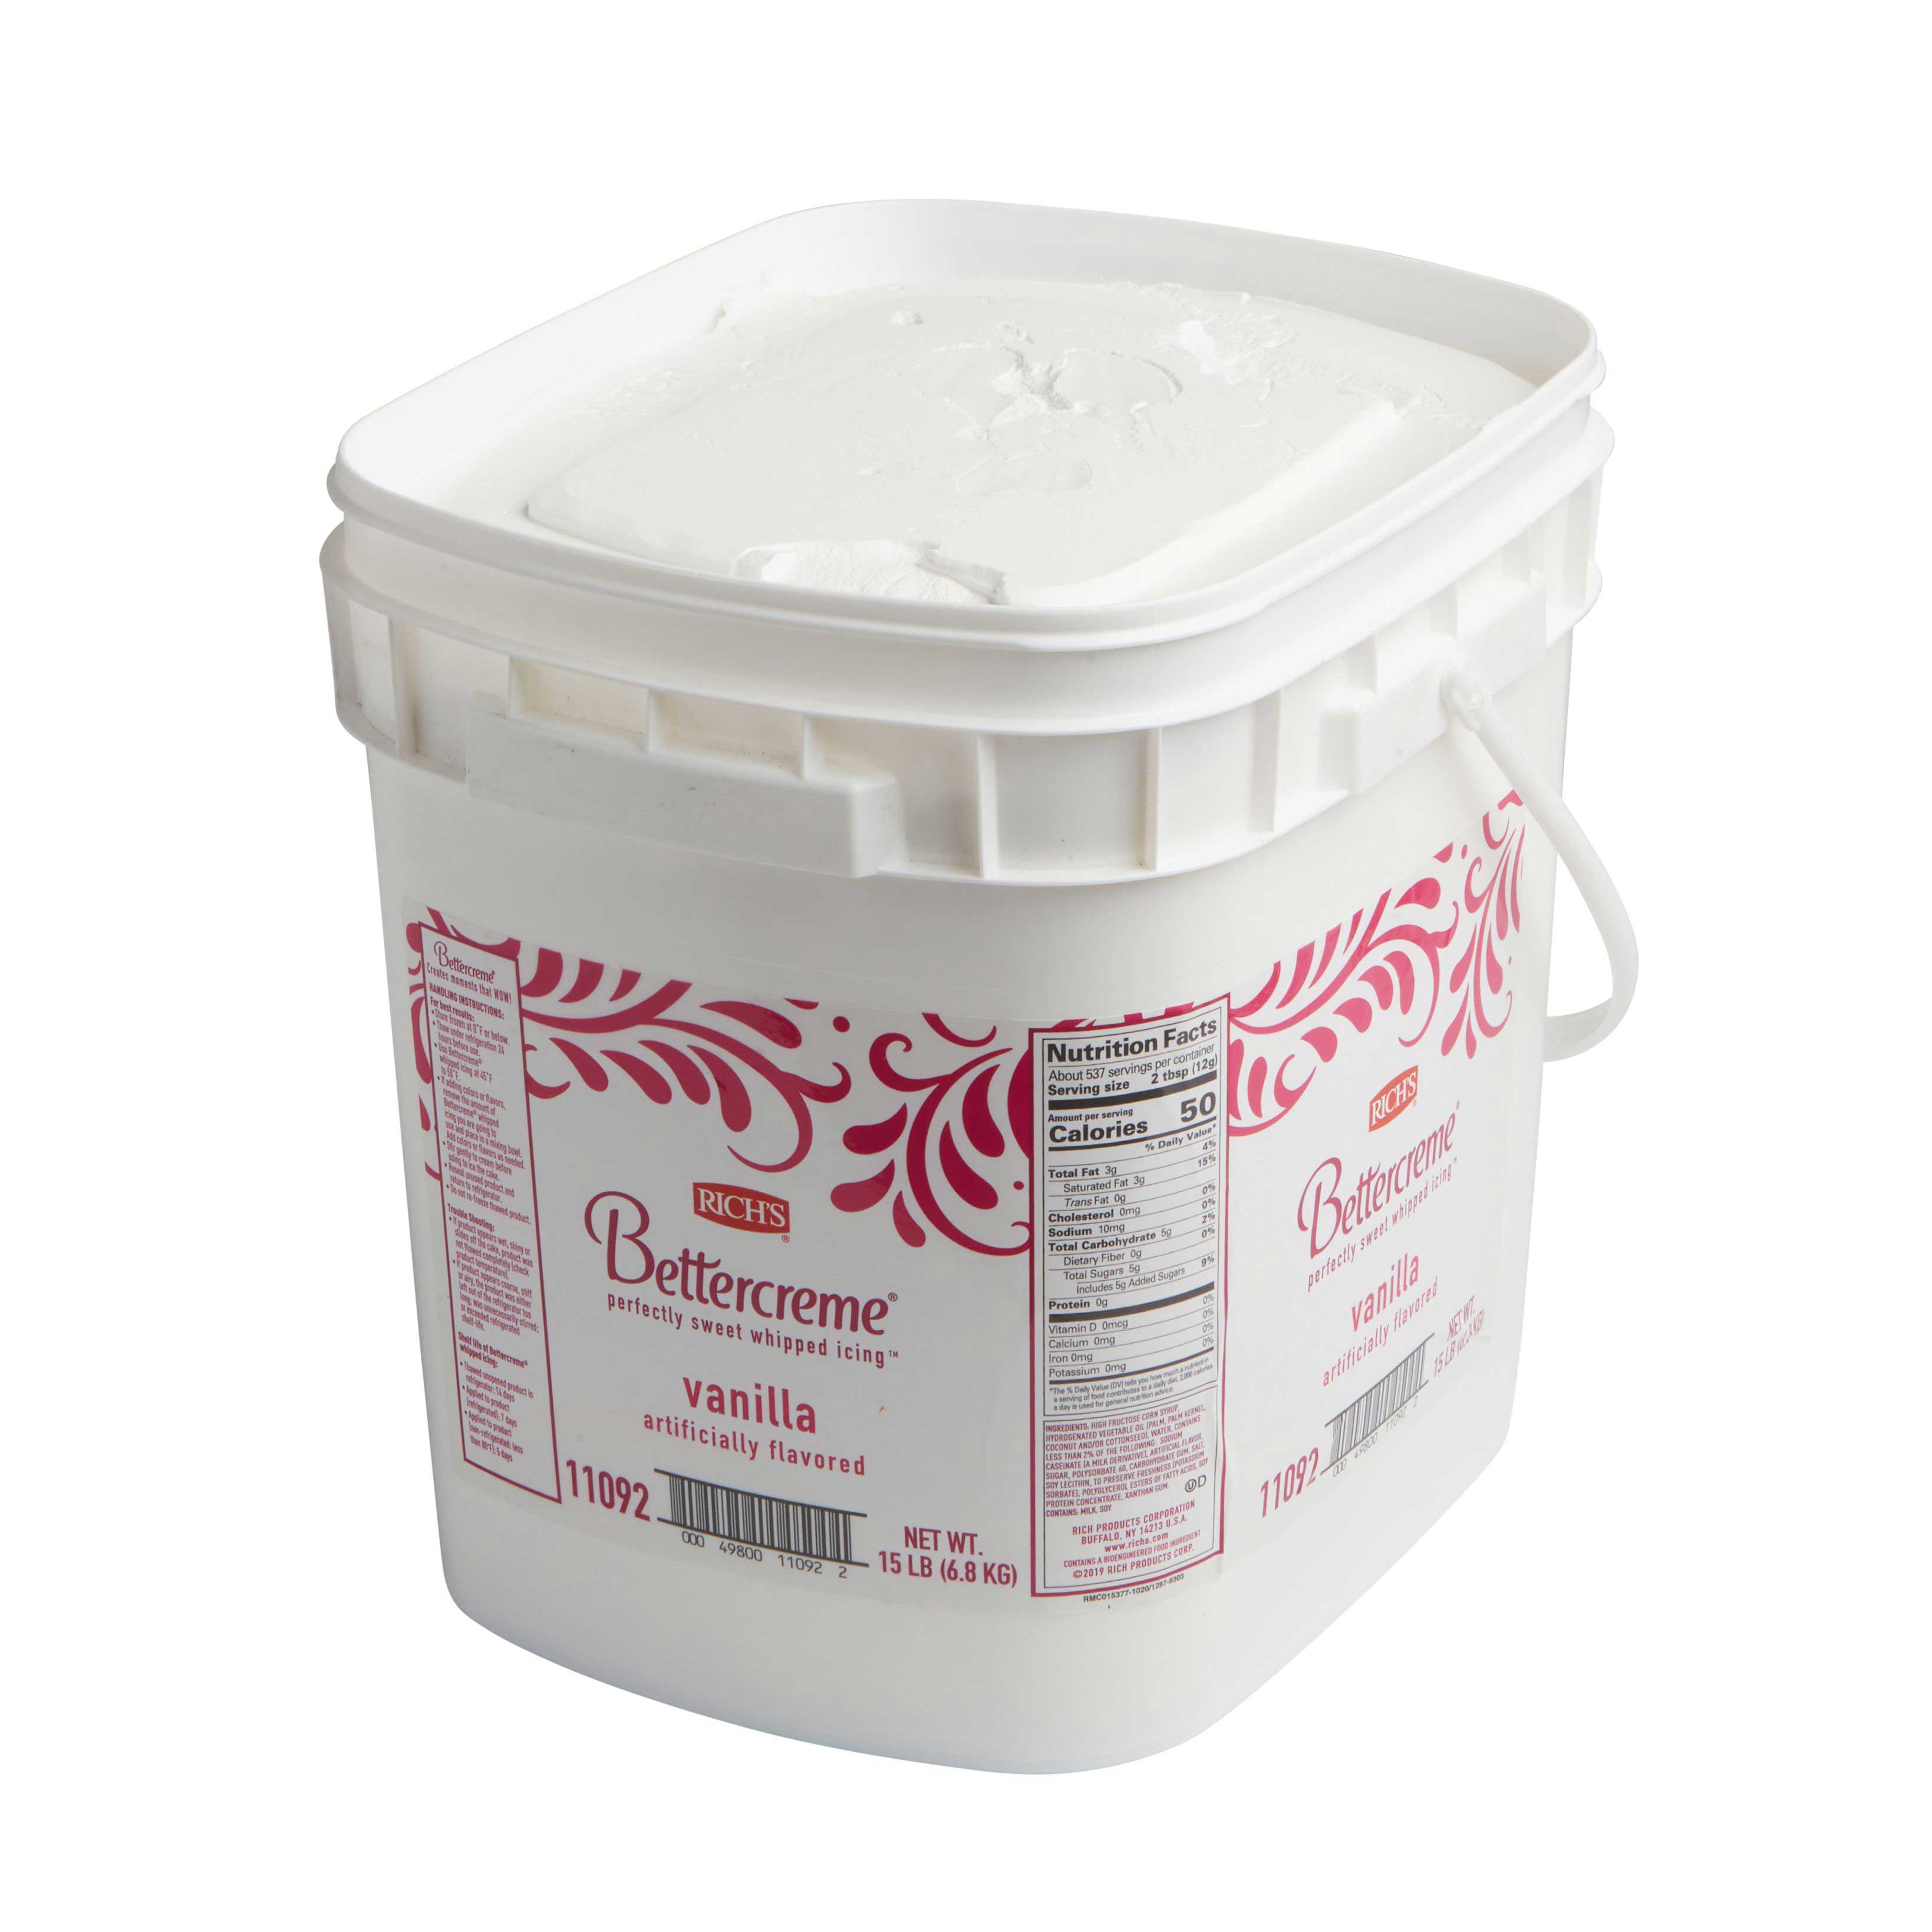 Rich's Bettercreme Vanilla Pre Whipped Icing, 15 pound